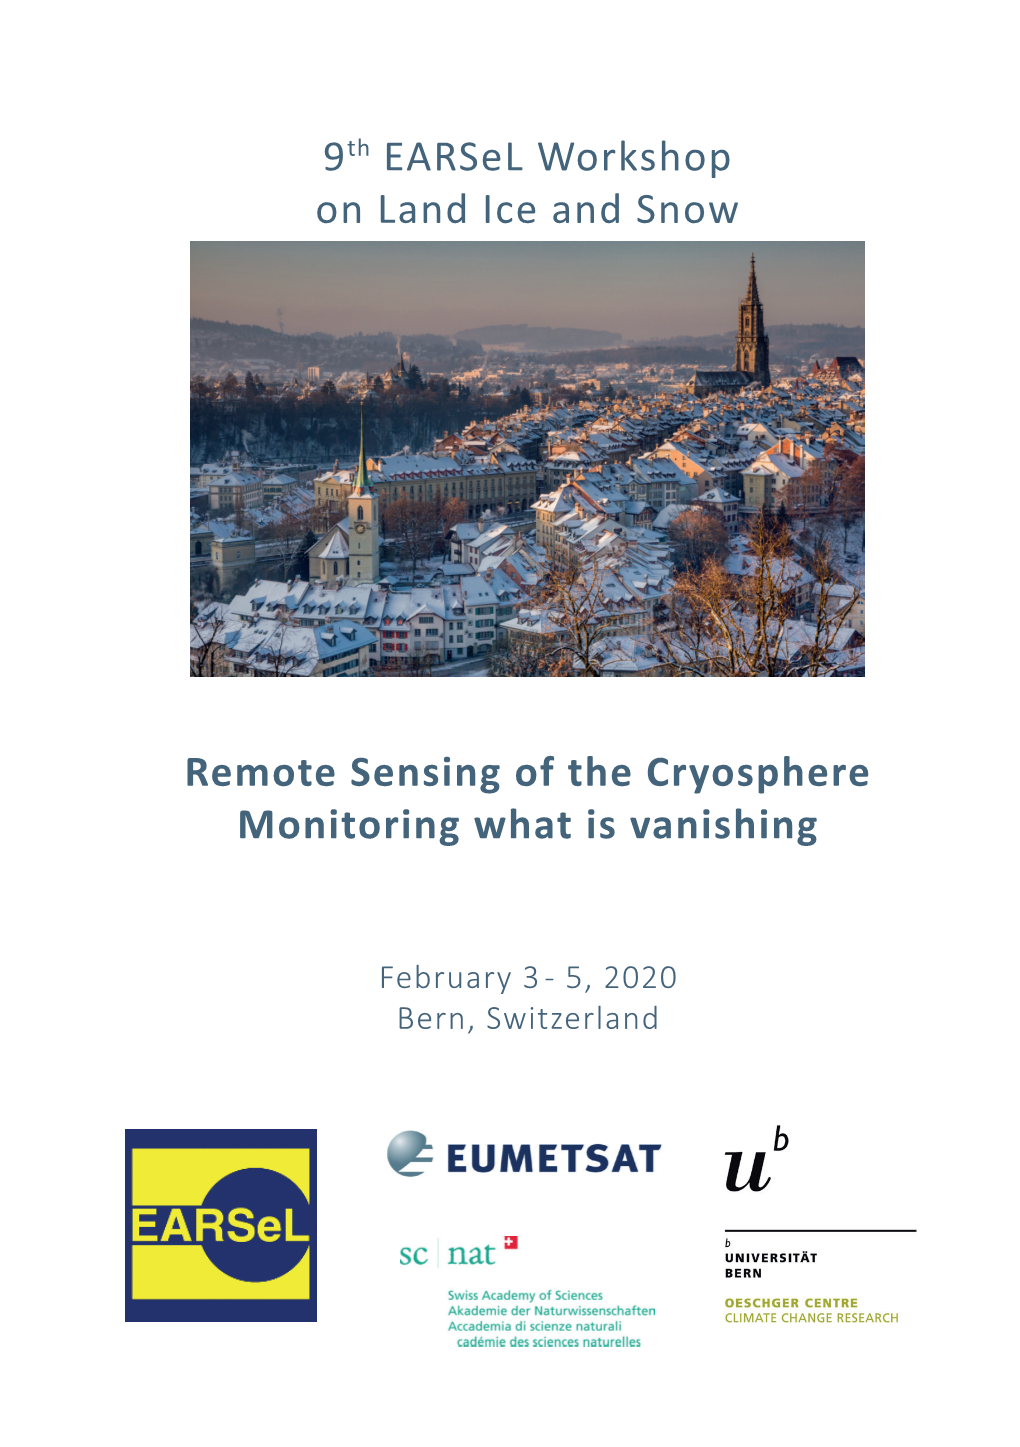 Remote Sensing of the Cryosphere Monitoring What Is Vanishing 9Th